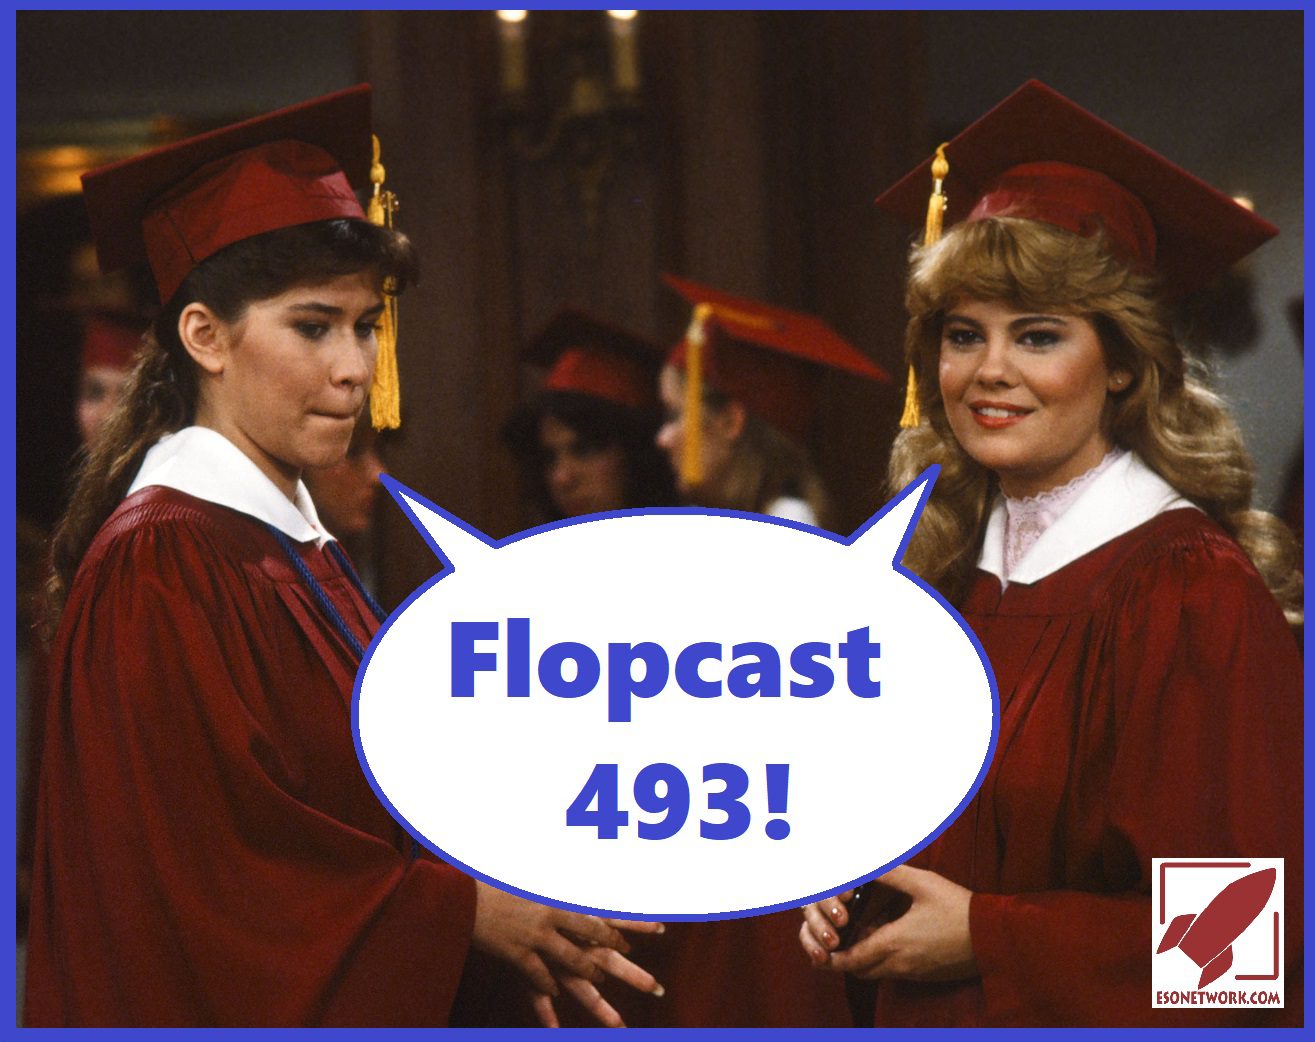 Flopcast 493 The Facts of Life